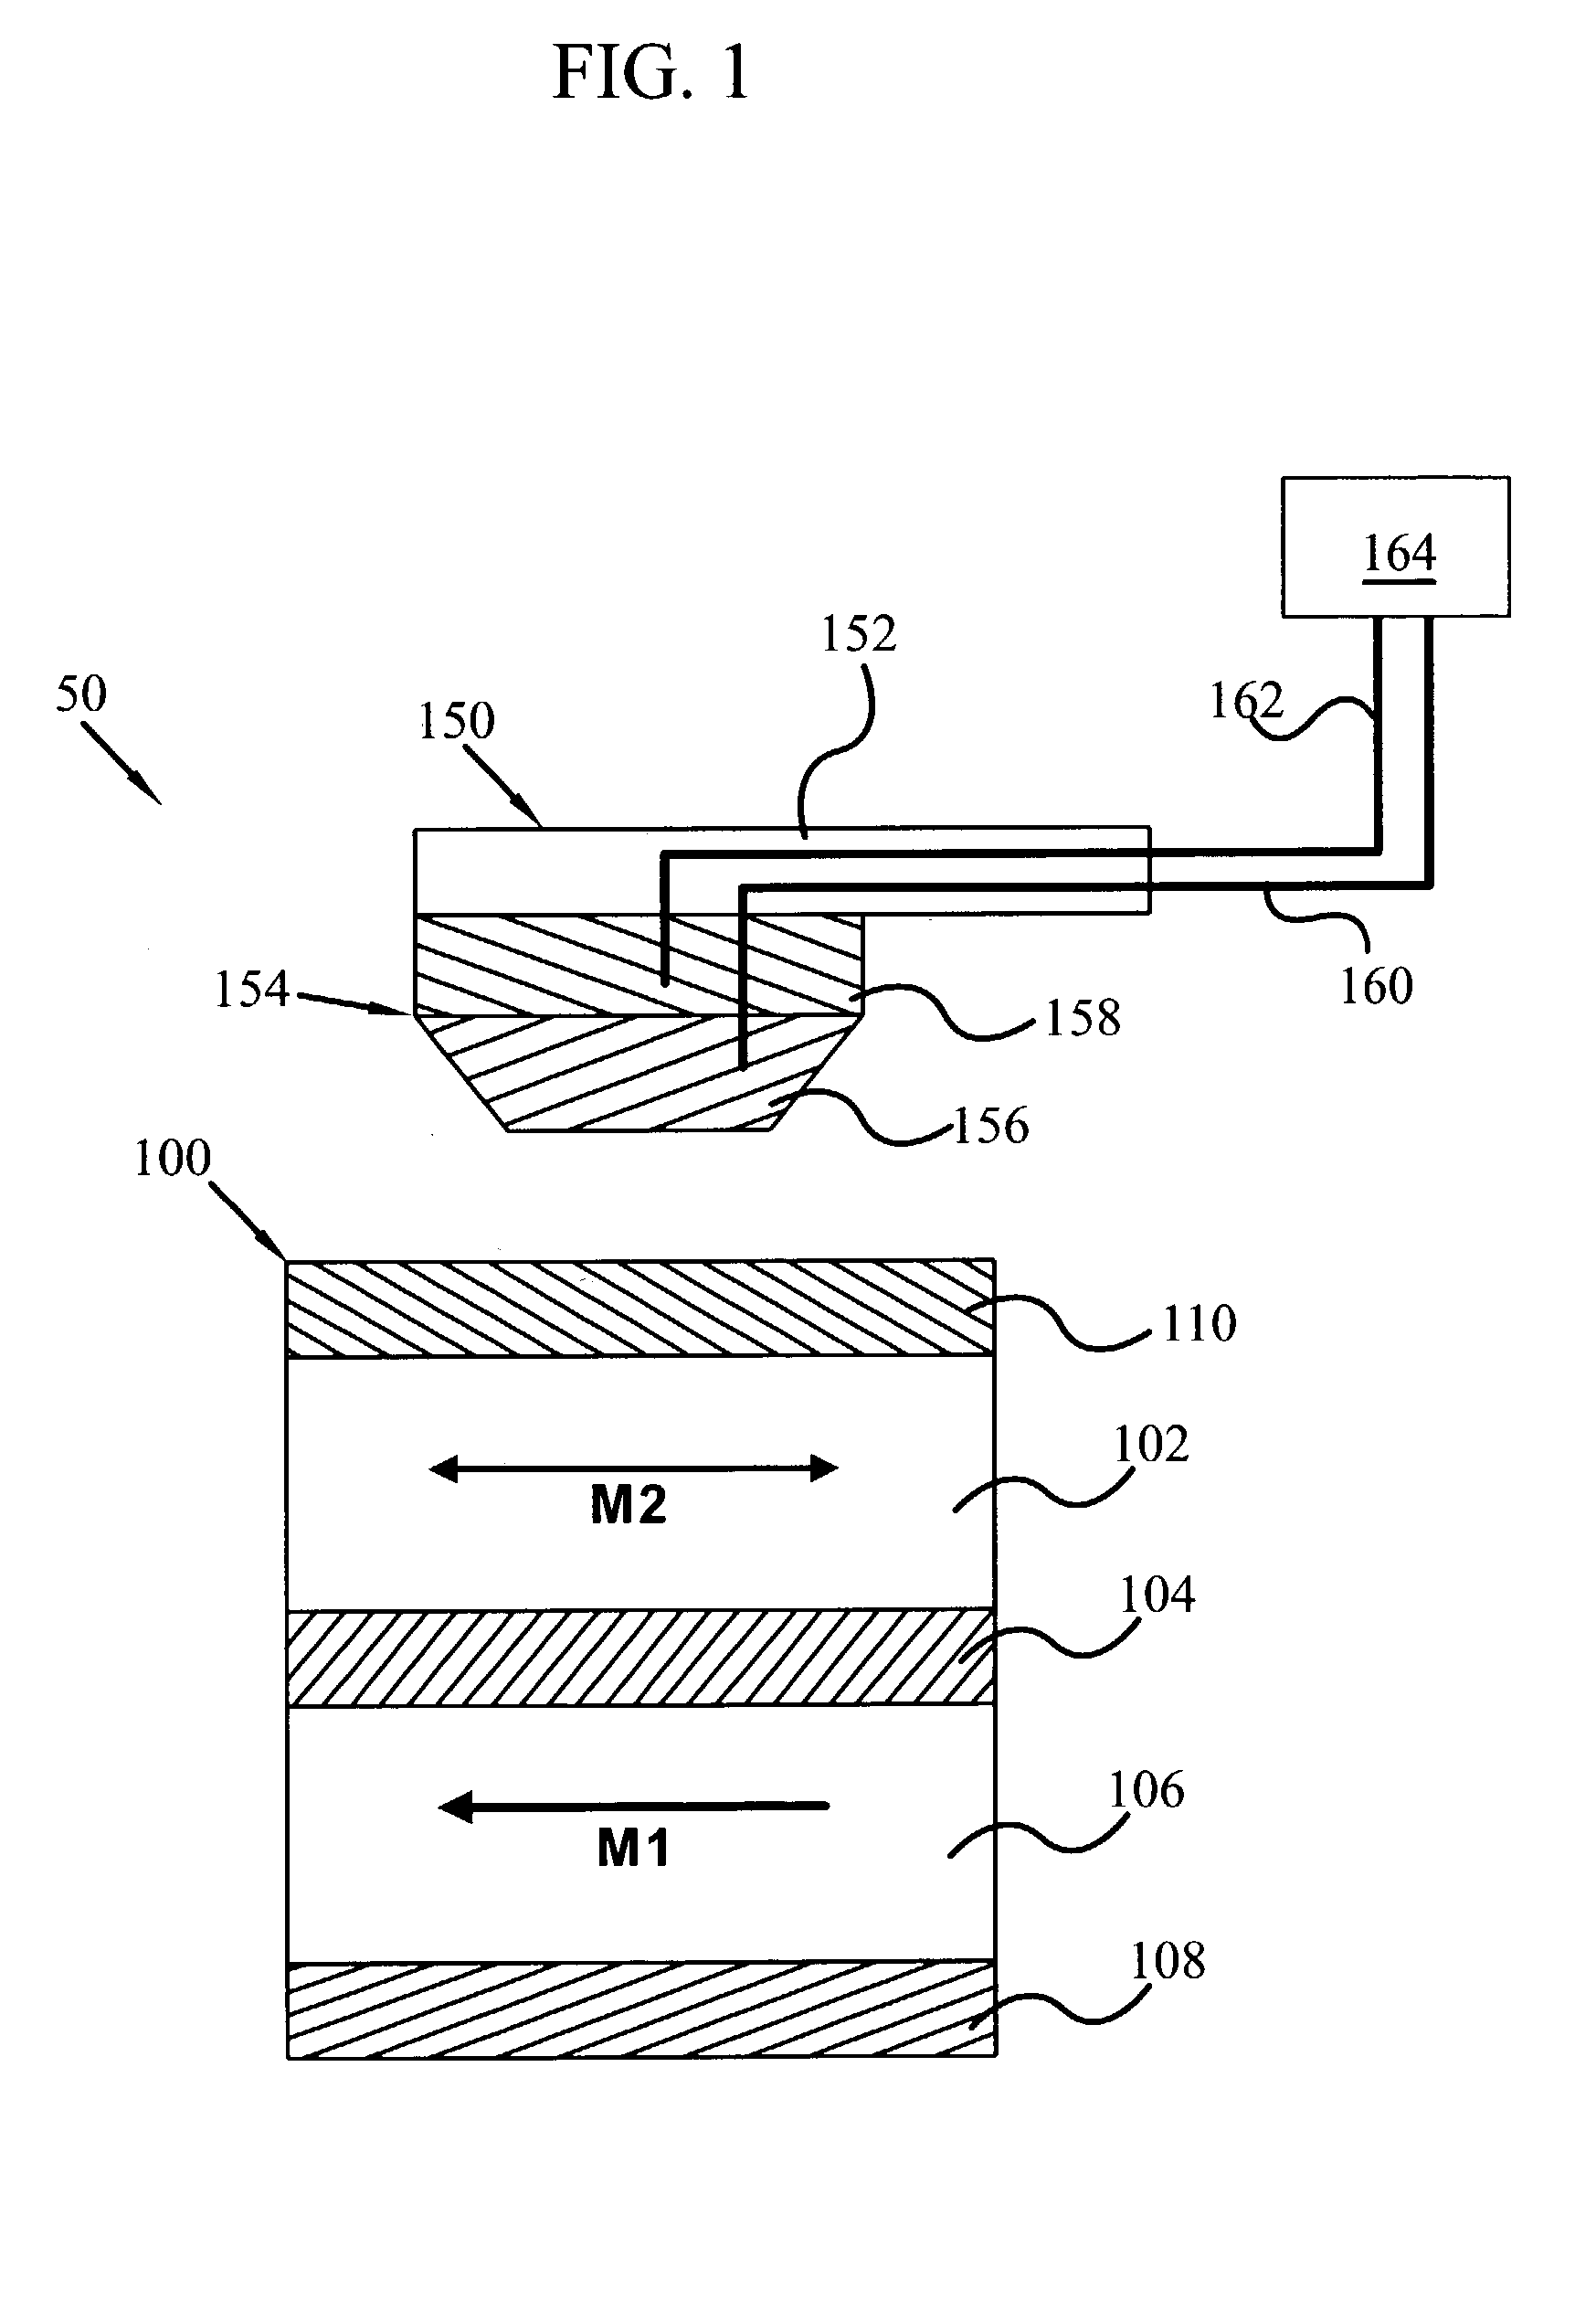 Thermal-assisted magnetic memory storage device